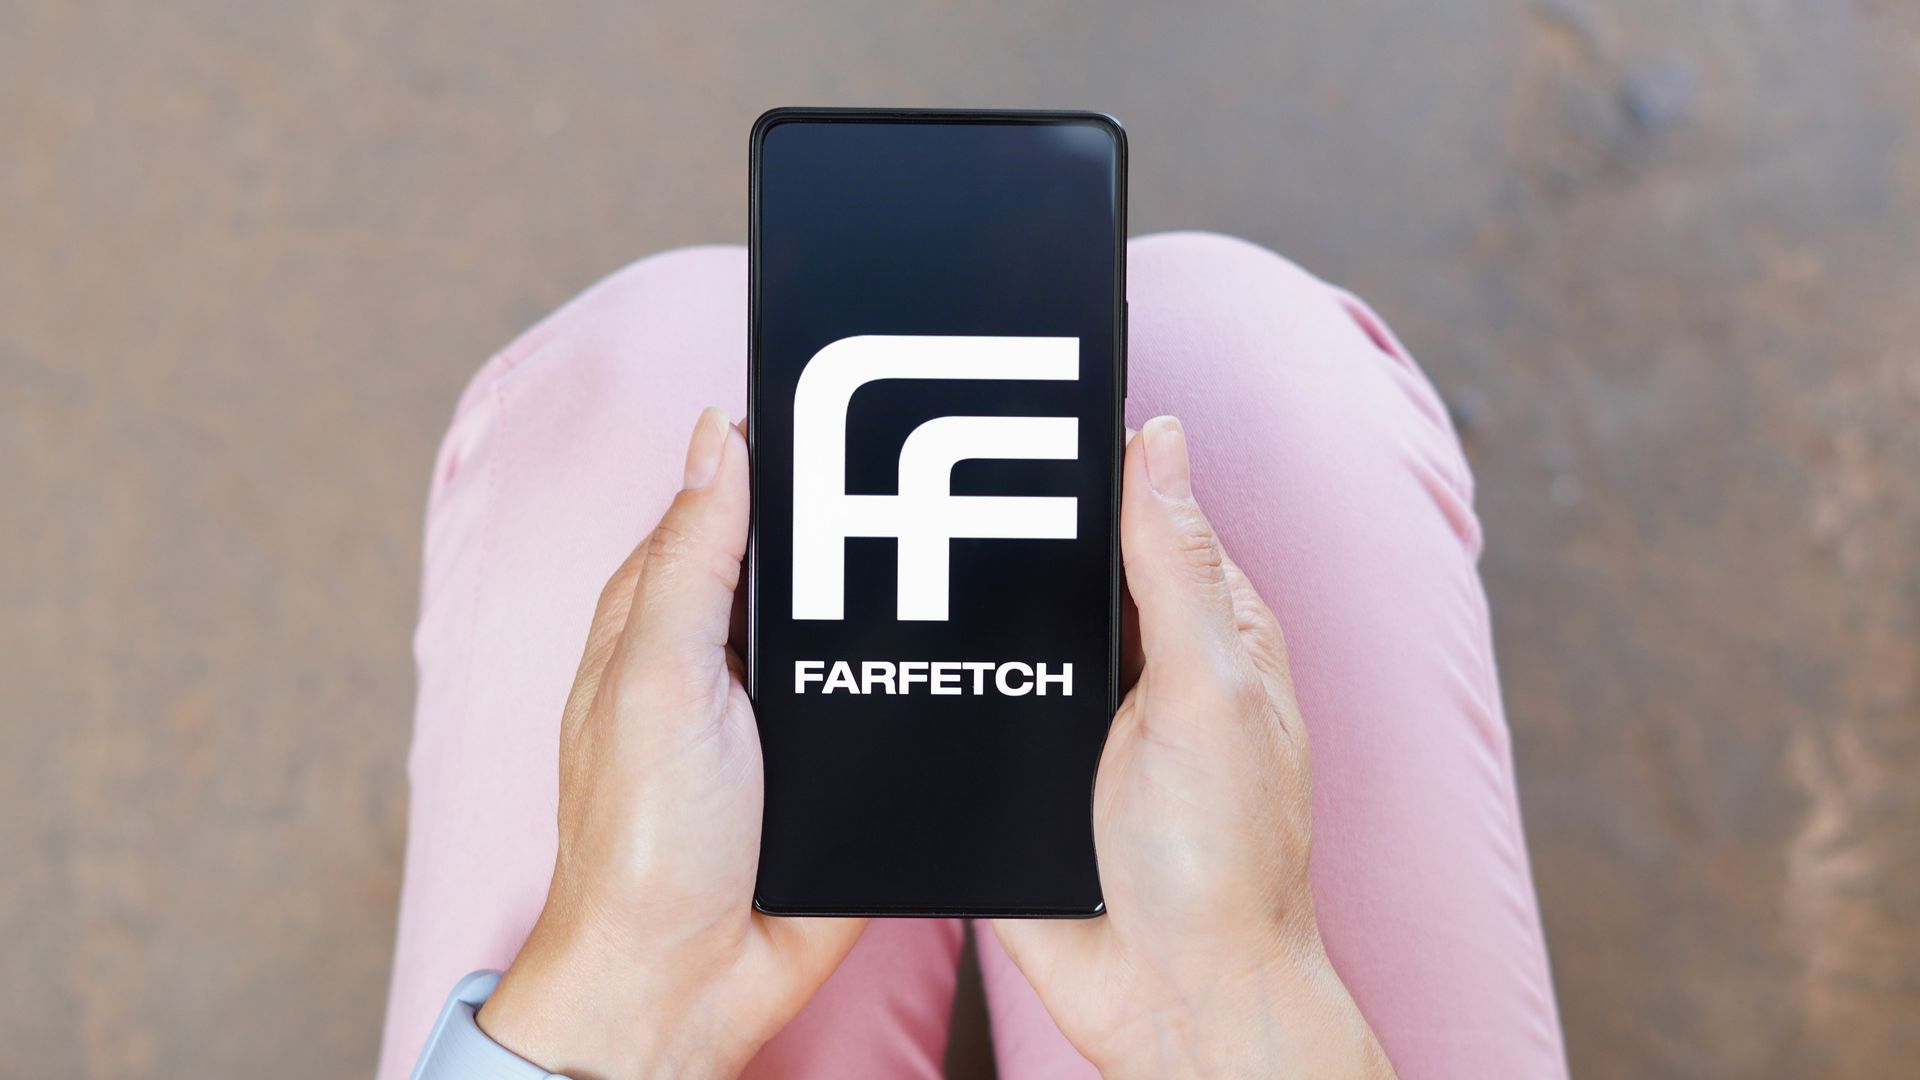 A photo of someone holding a phone displaying the FarFetch logo